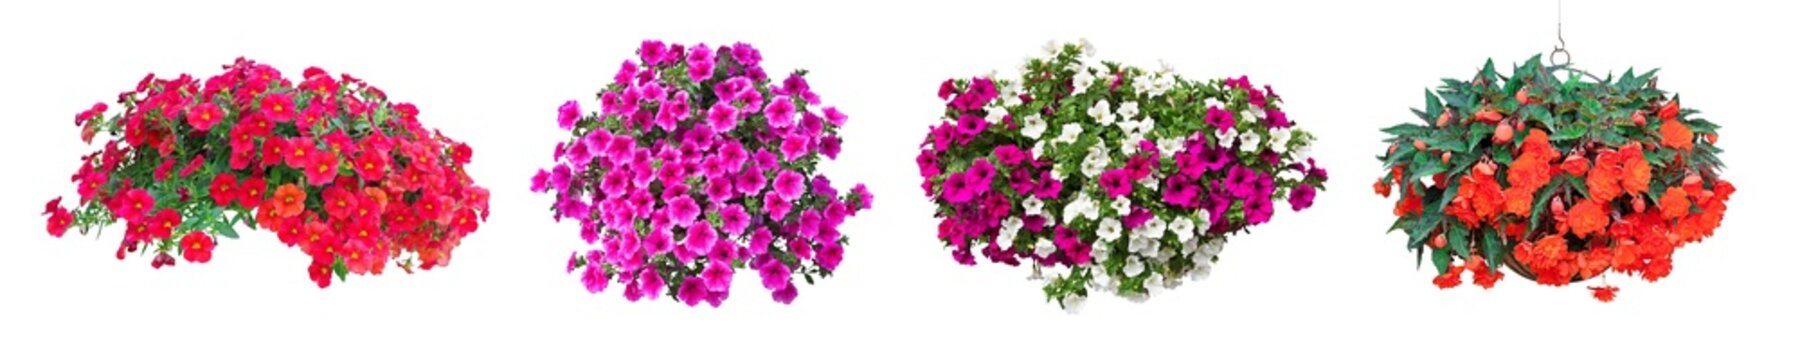 collection of petunia flowers isolated on transparent background